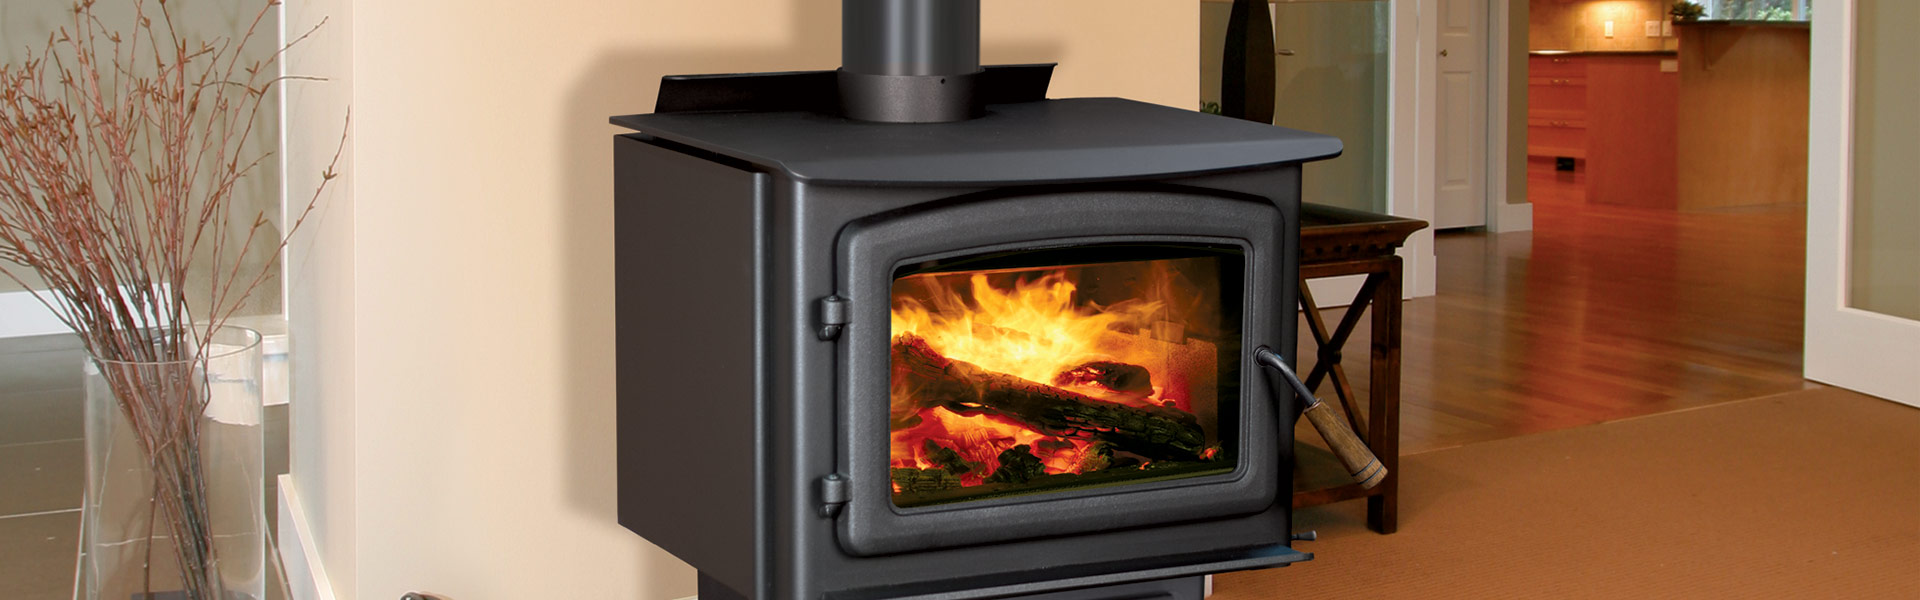 Your Guide To Buying a Wood Stove For Your Home